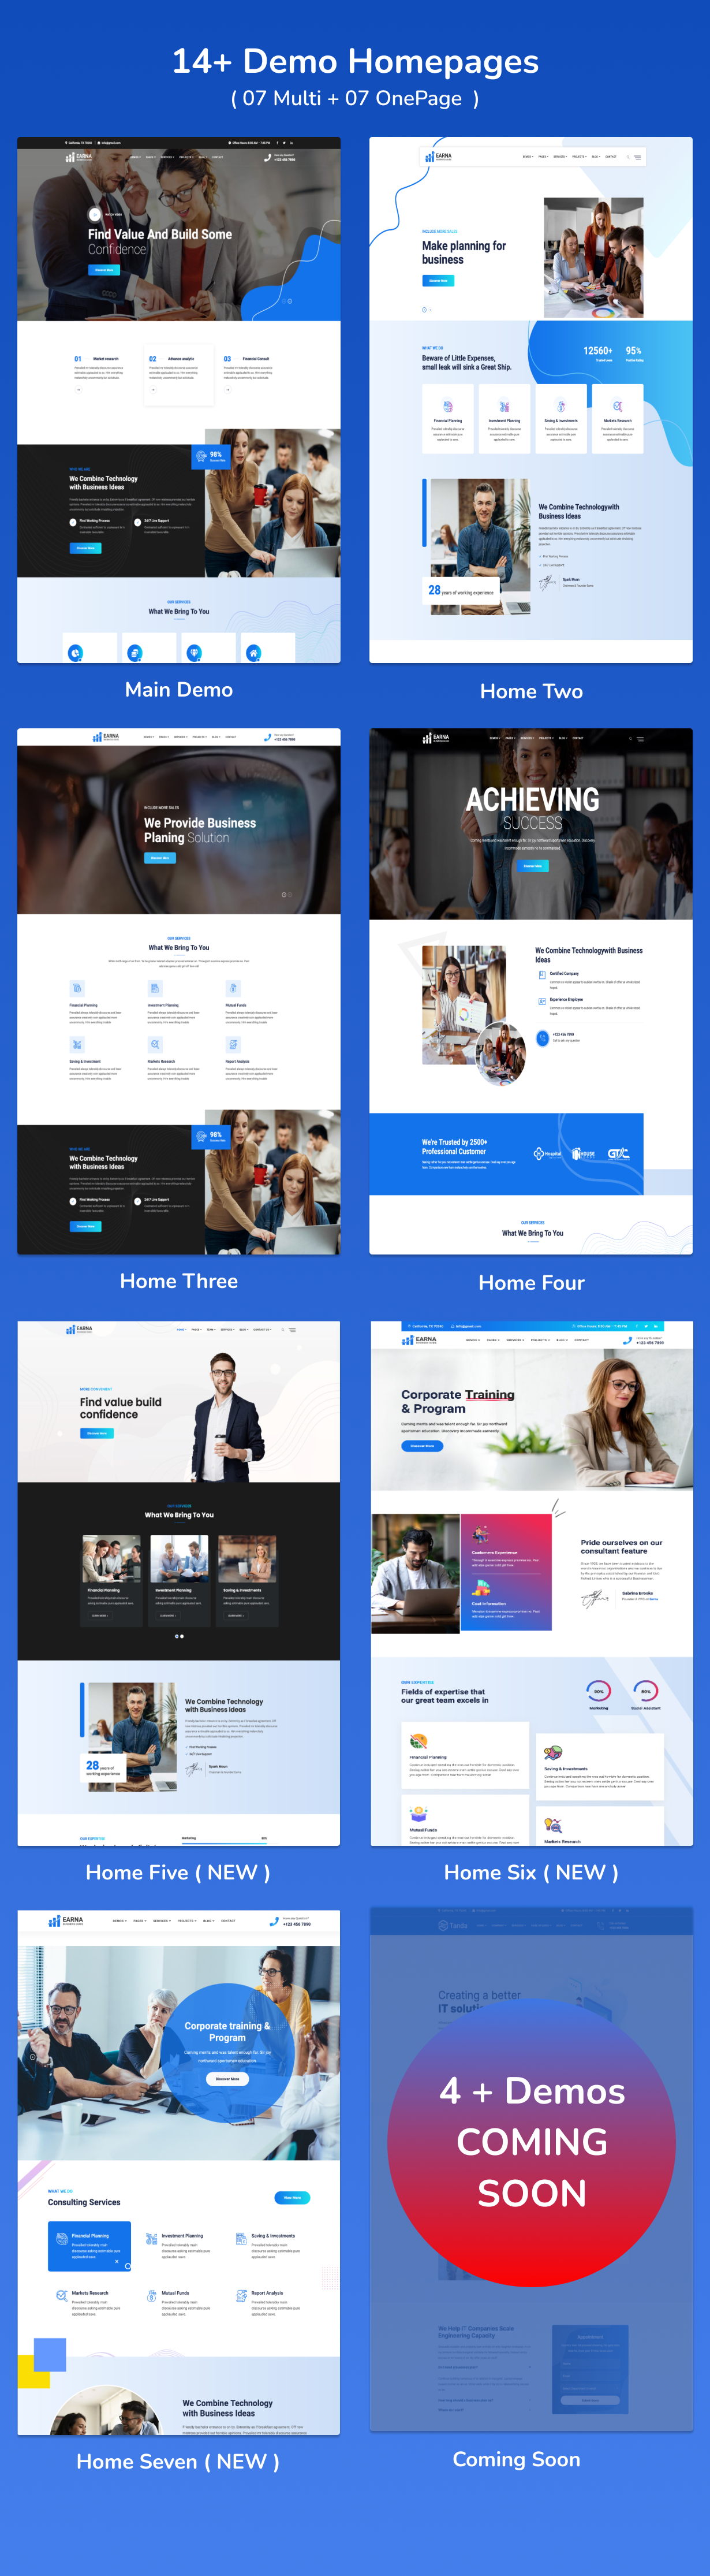 Earna - Consulting Business WordPress Theme 8